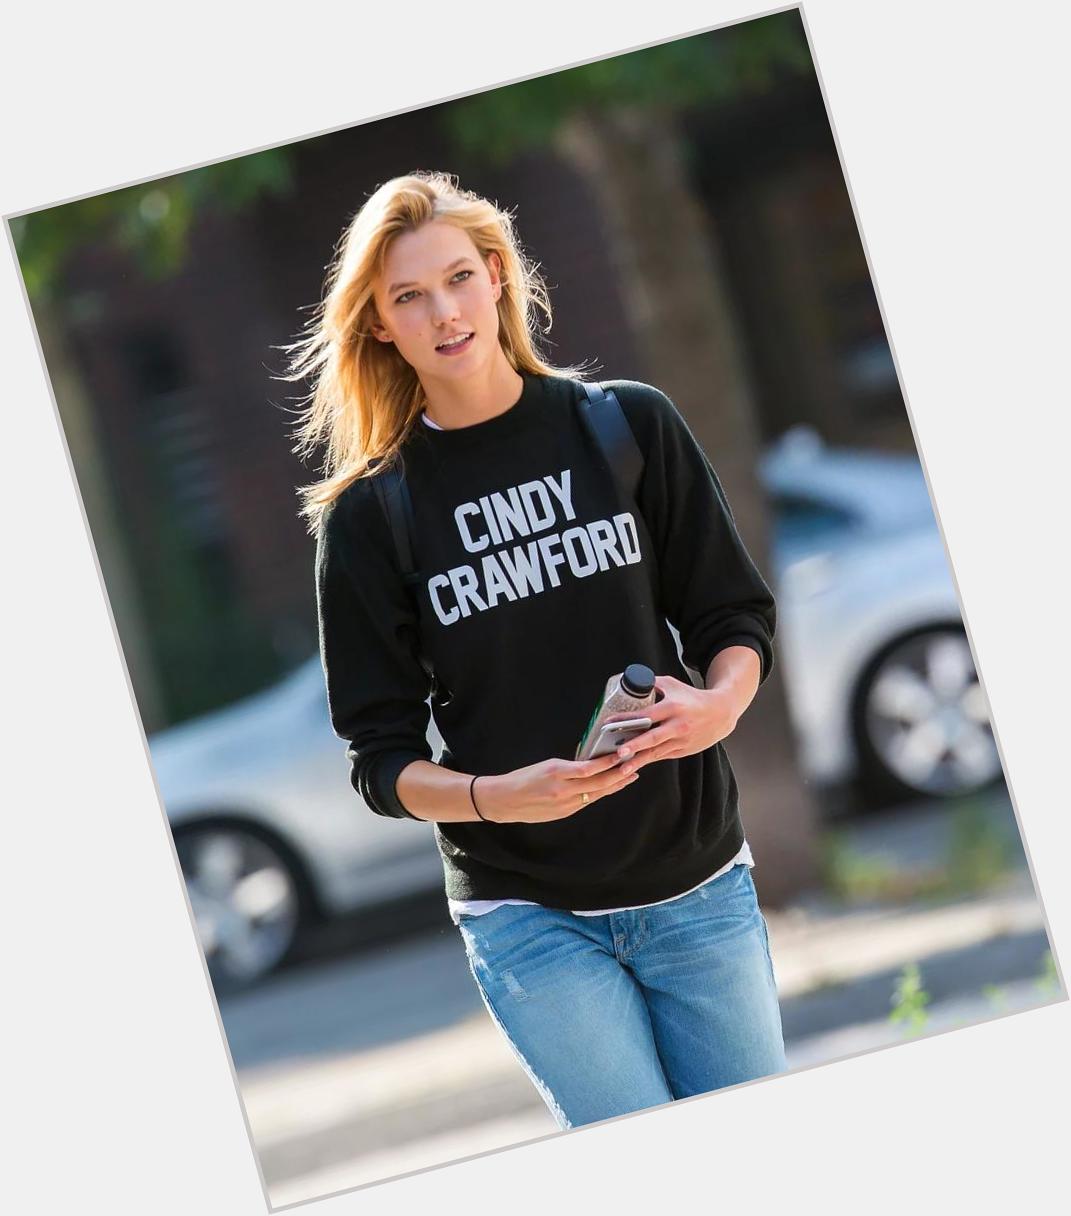 Happy Birthday to Cindy Crawford!! ( you should wear this sweatshirt more or send it to me) 